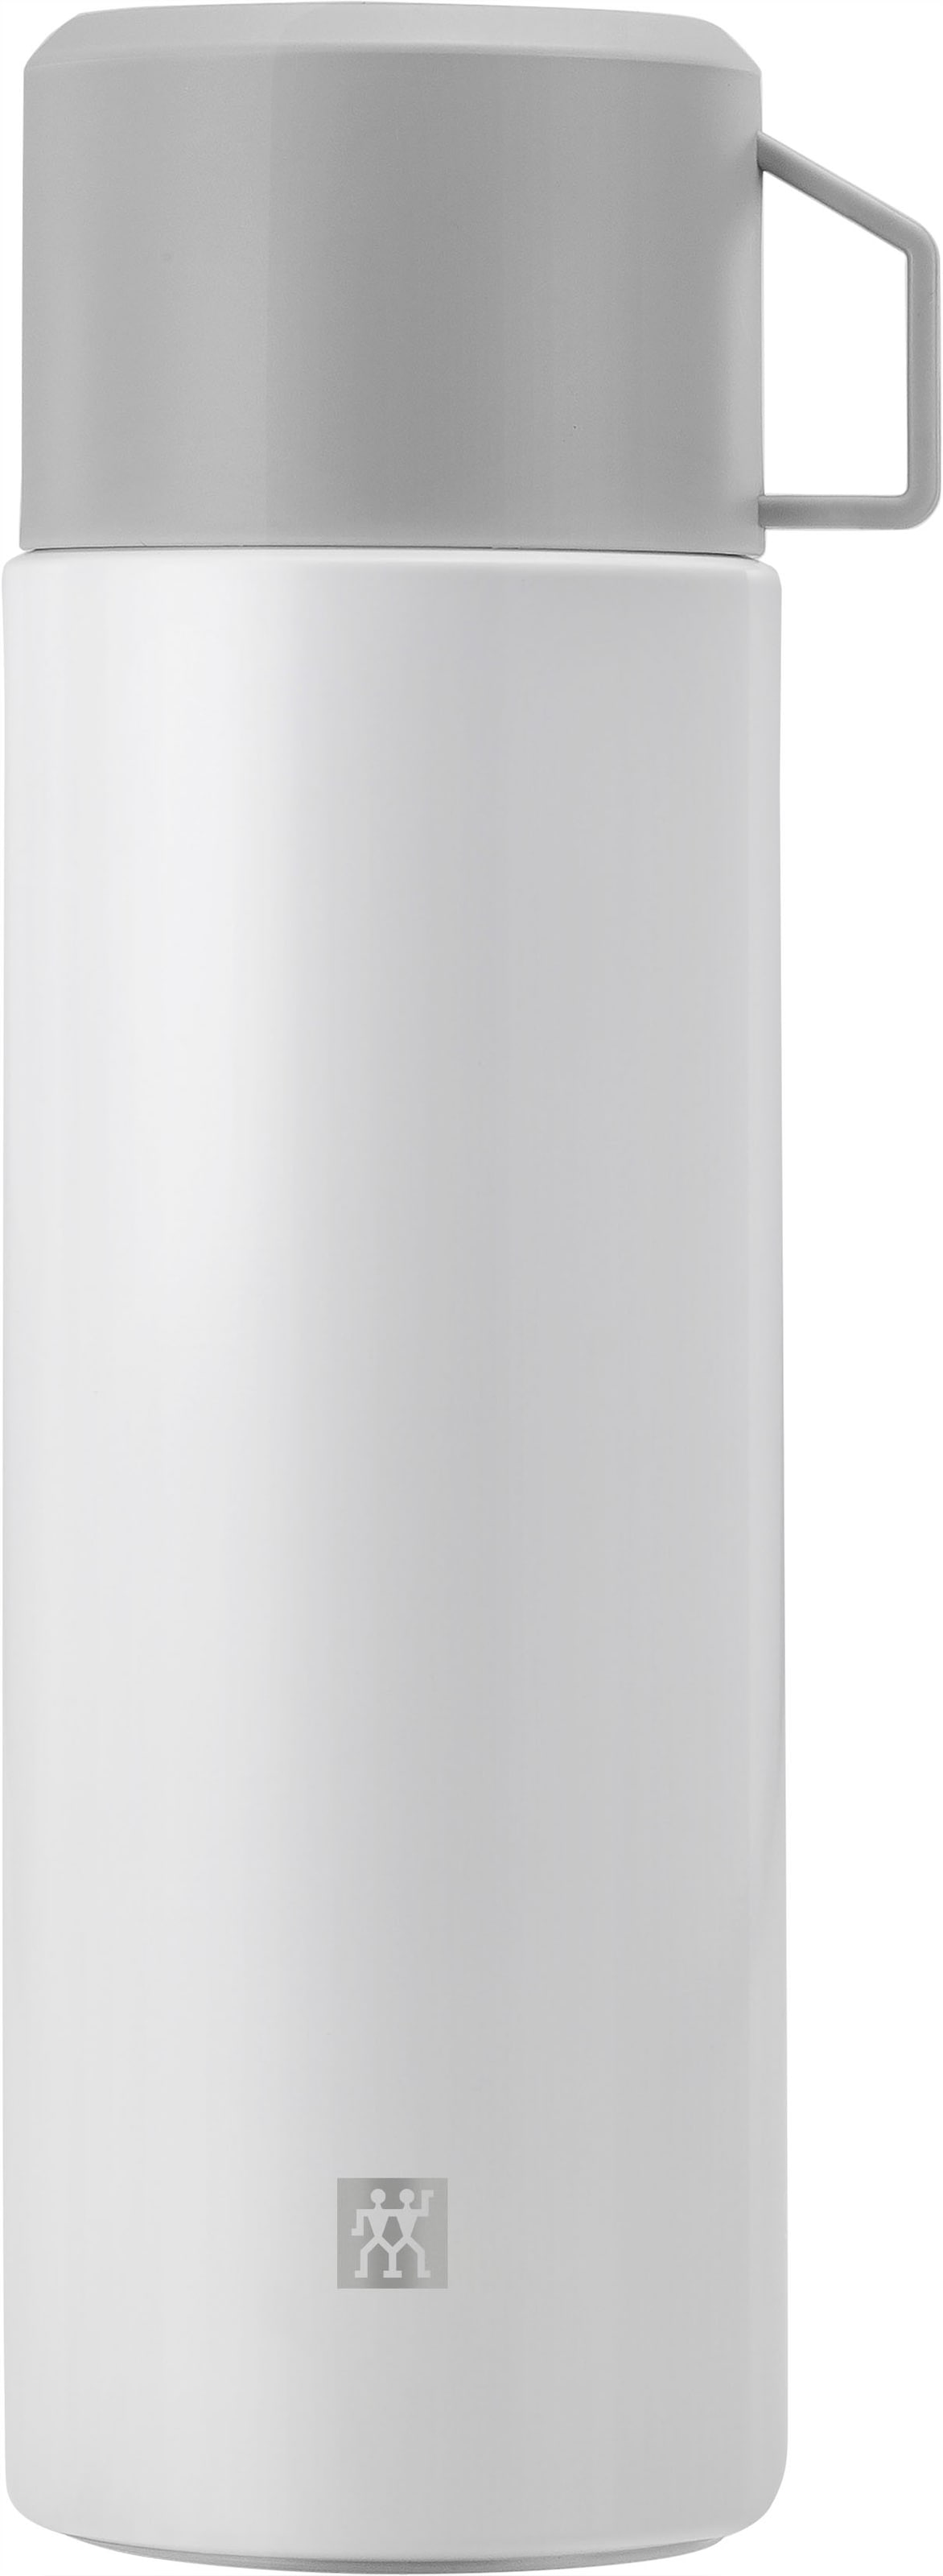 Zwilling Isolierflasche »THERMO« ideale Isolier...